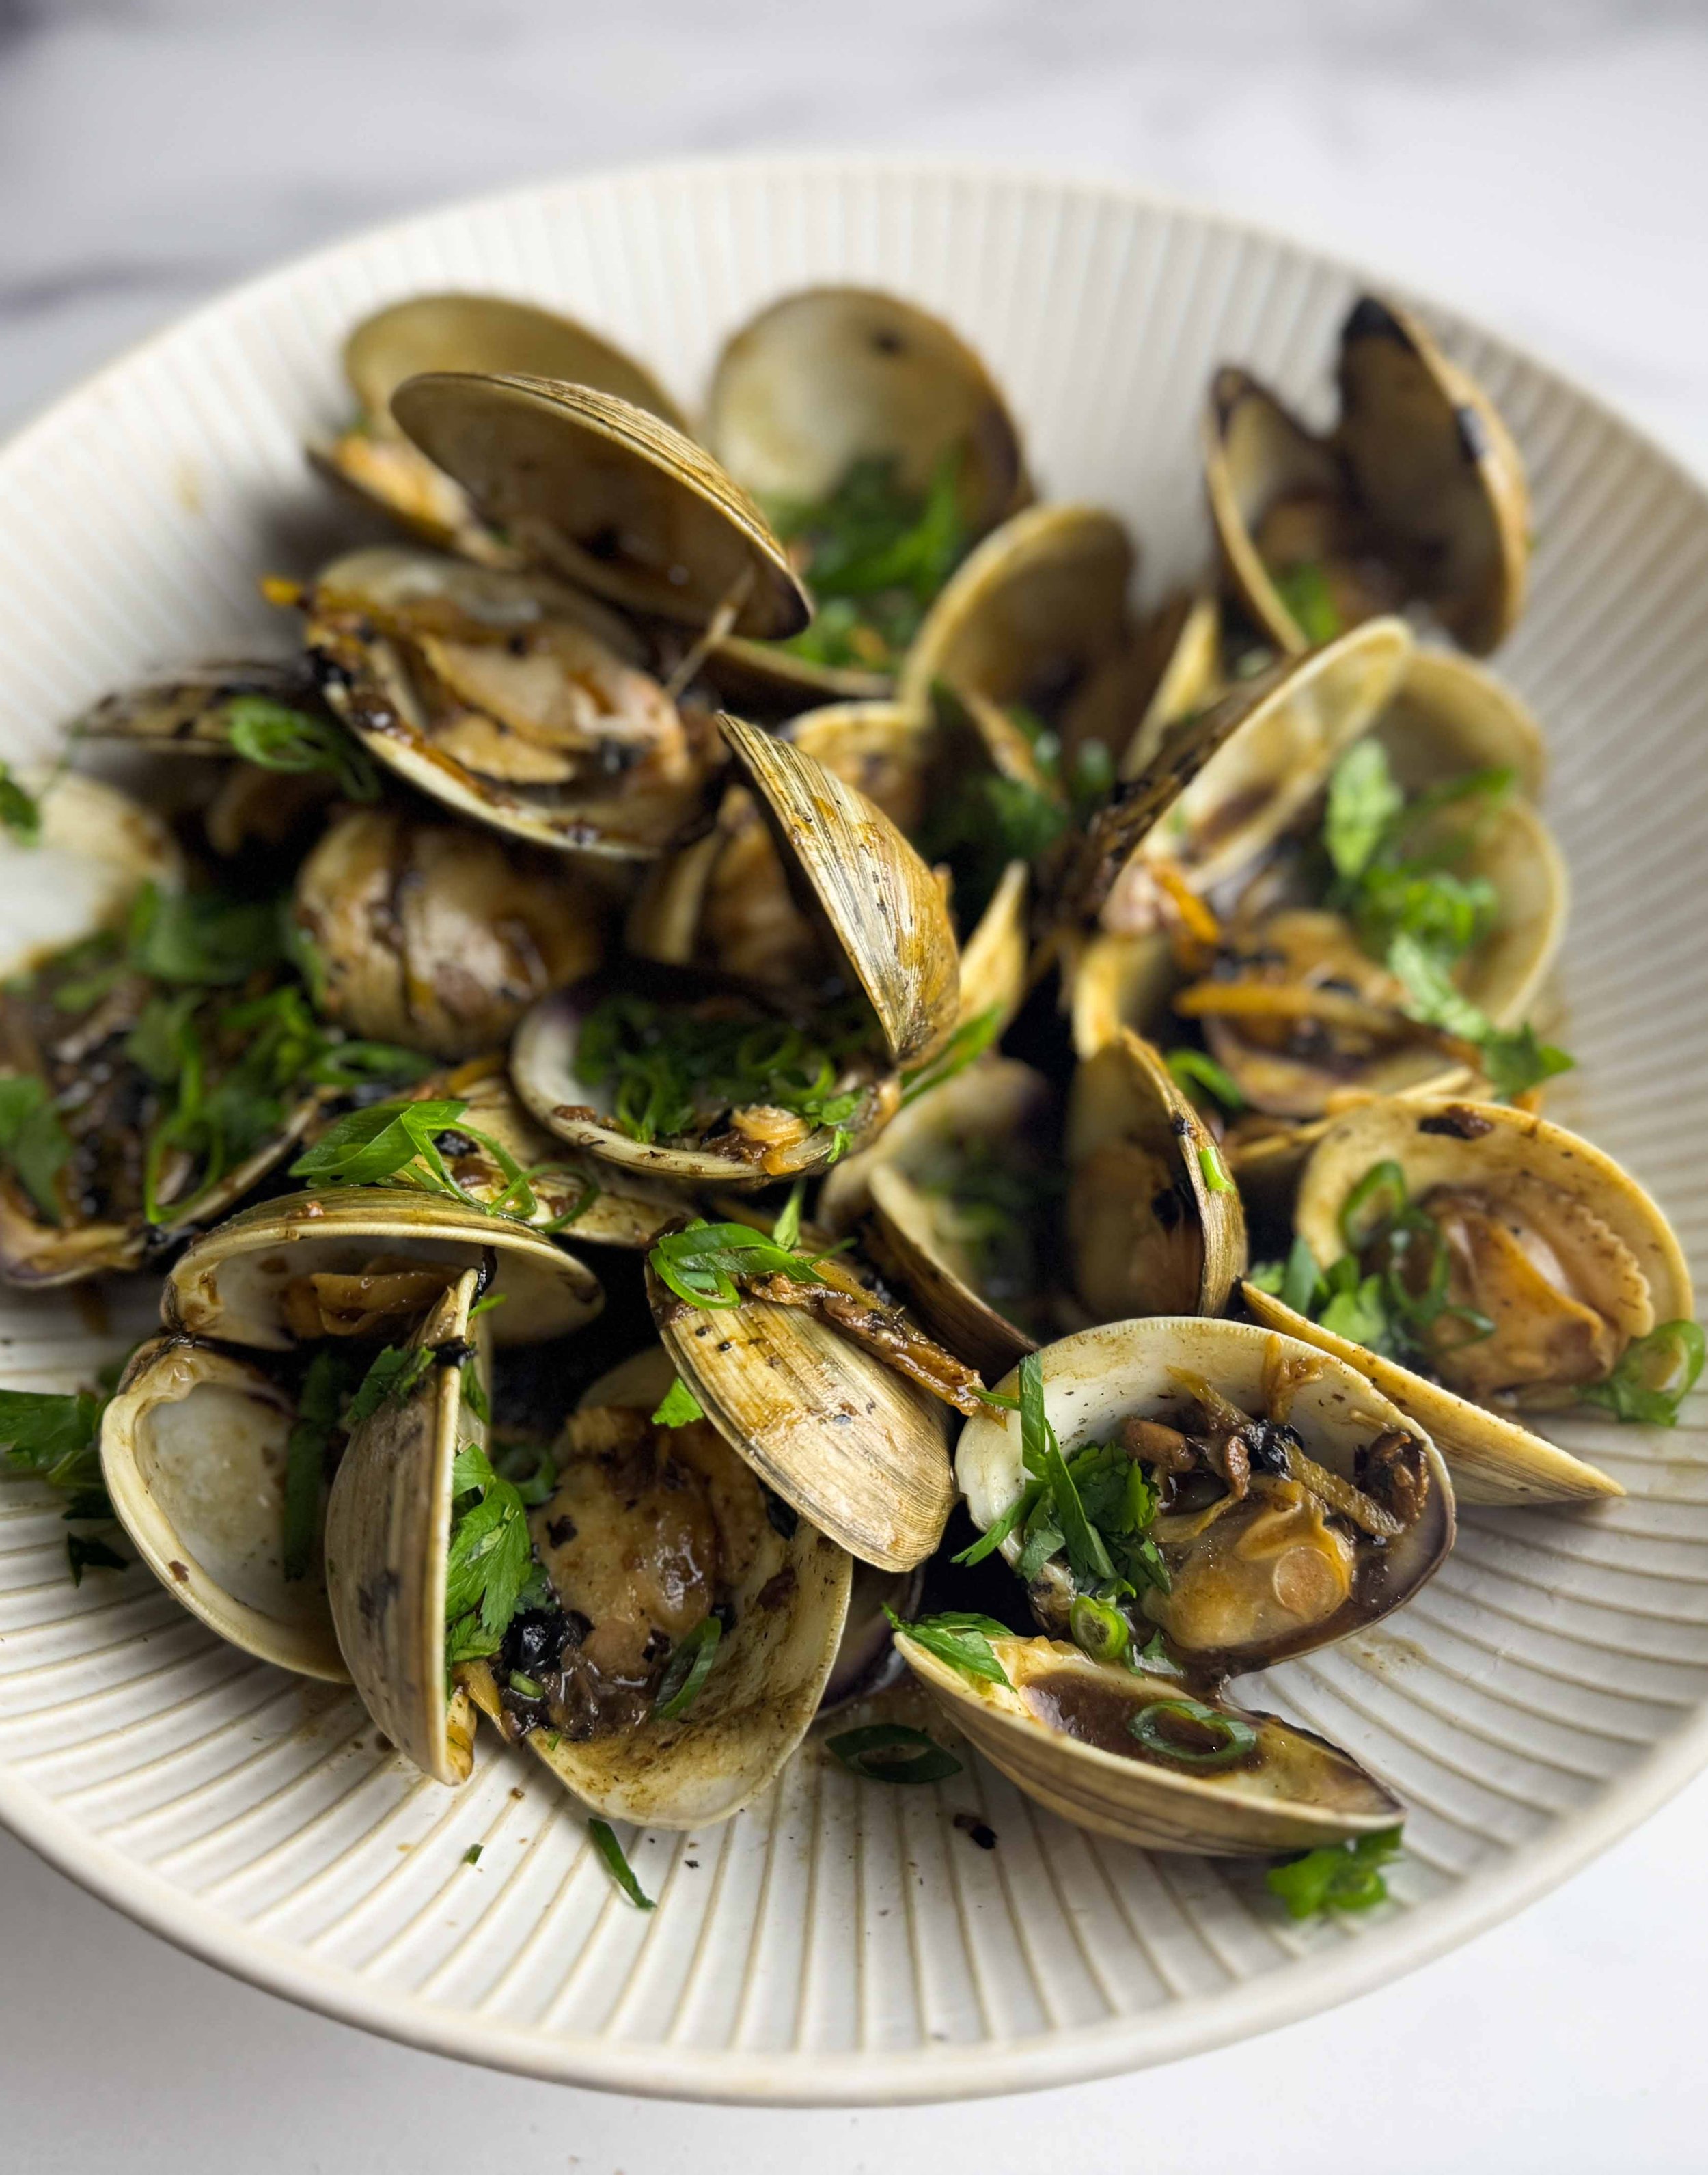 Clams Stir-Fried with Black Beans